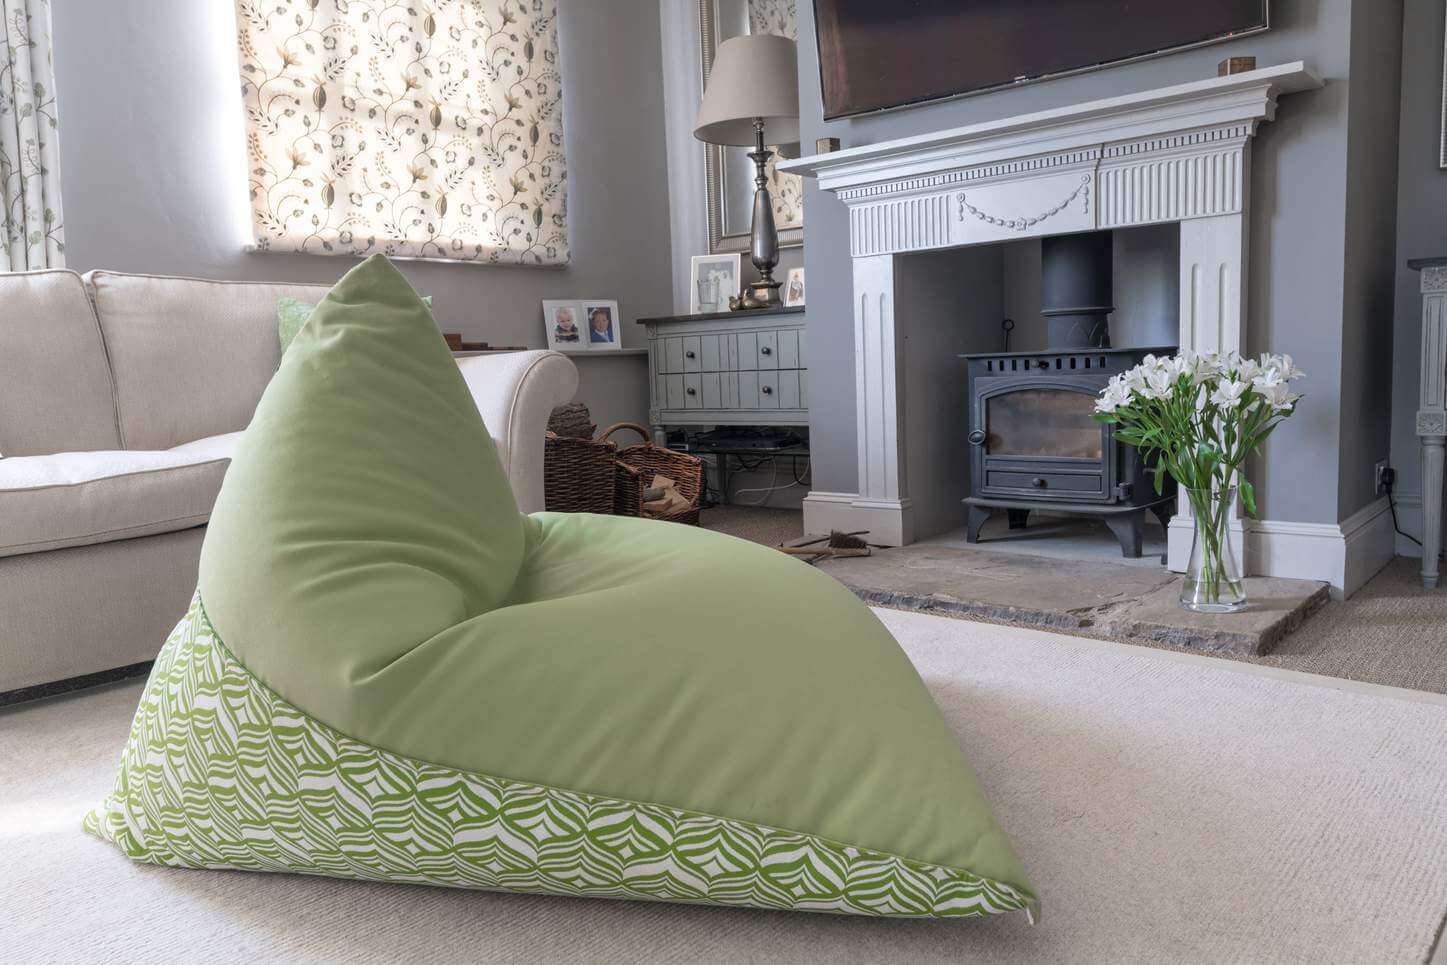 Lime green bean bag chair looking comfy in front of a fireplace